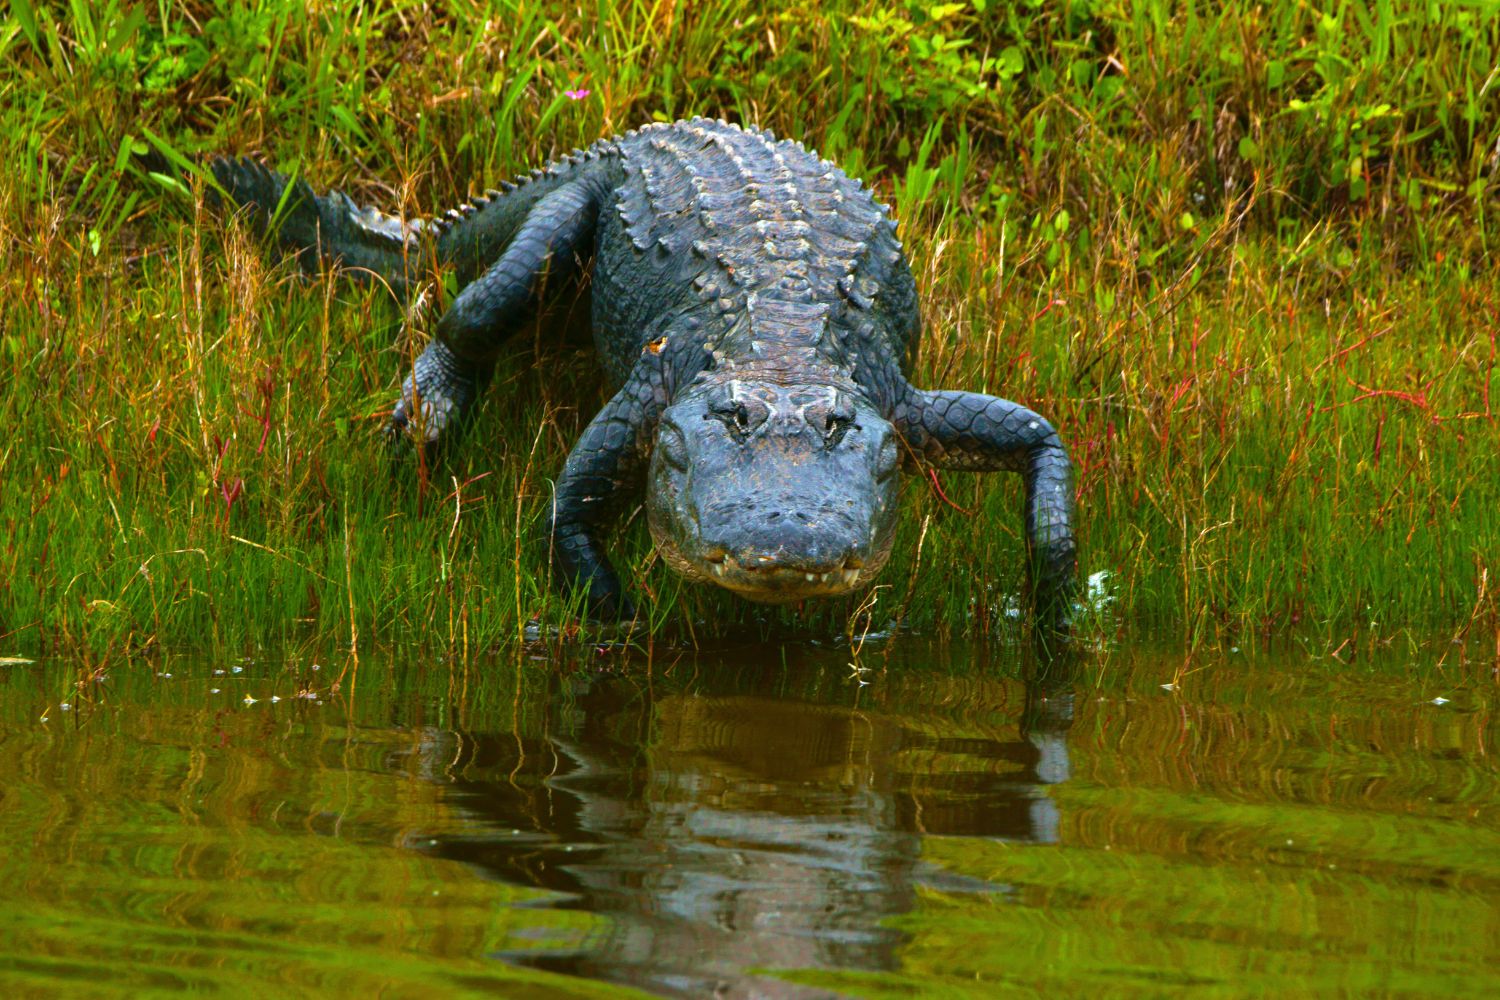 1. Caimans are native to Central and South America.